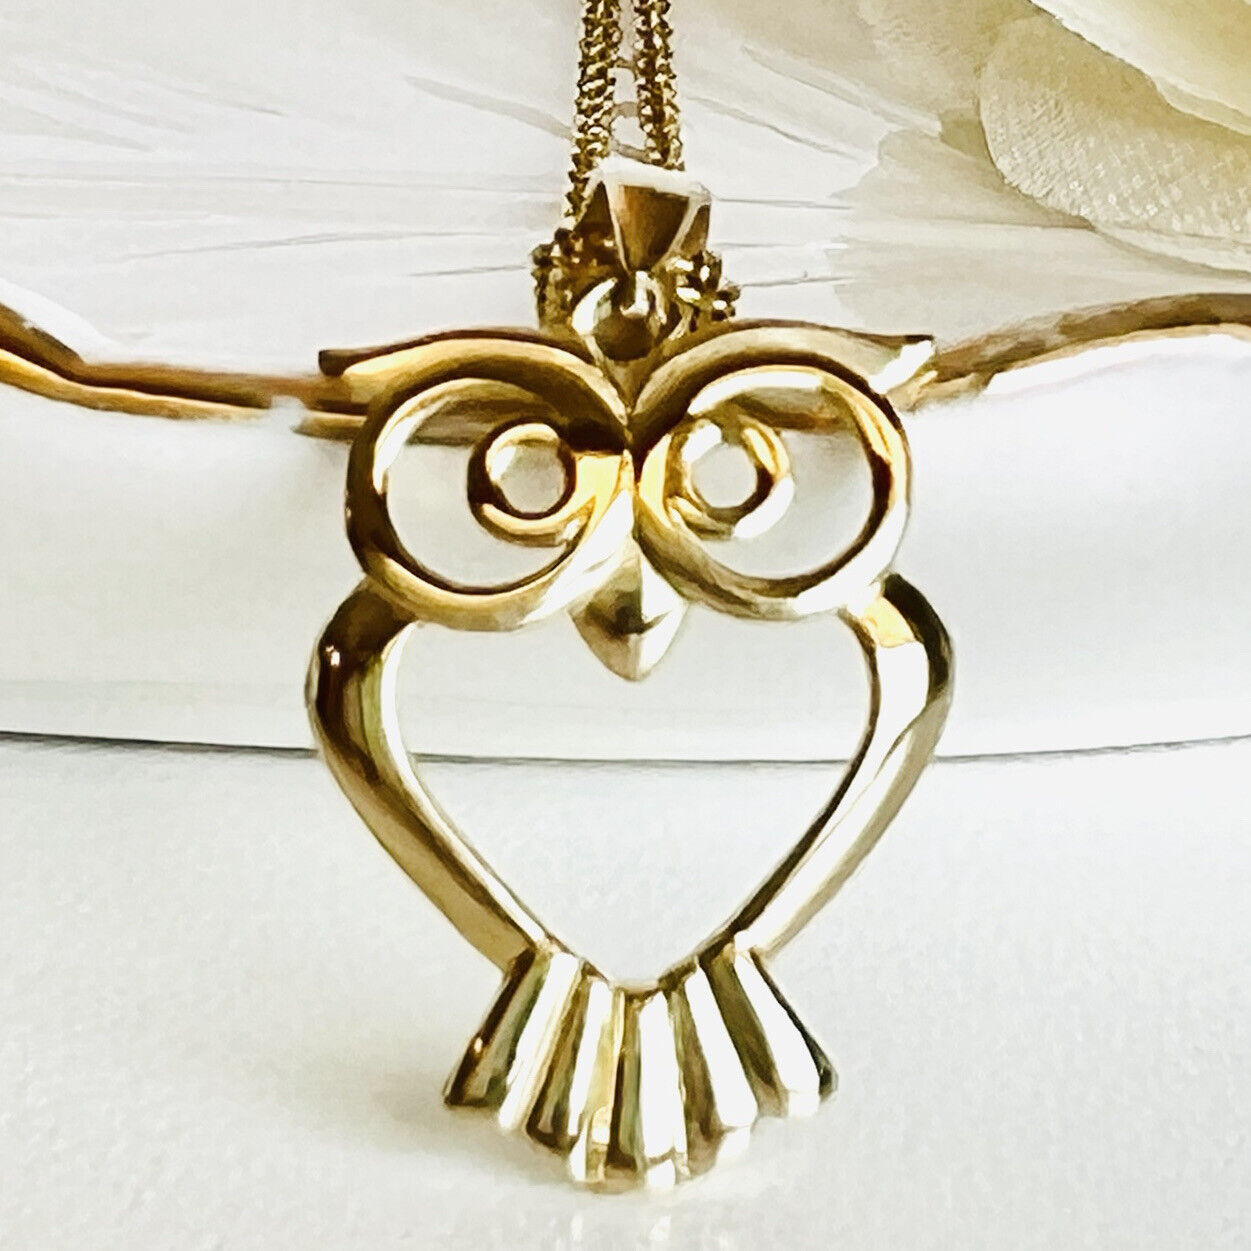 Adorable Solid 14k Yellow Gold Owl Pendant/Charm, New, 0.94"